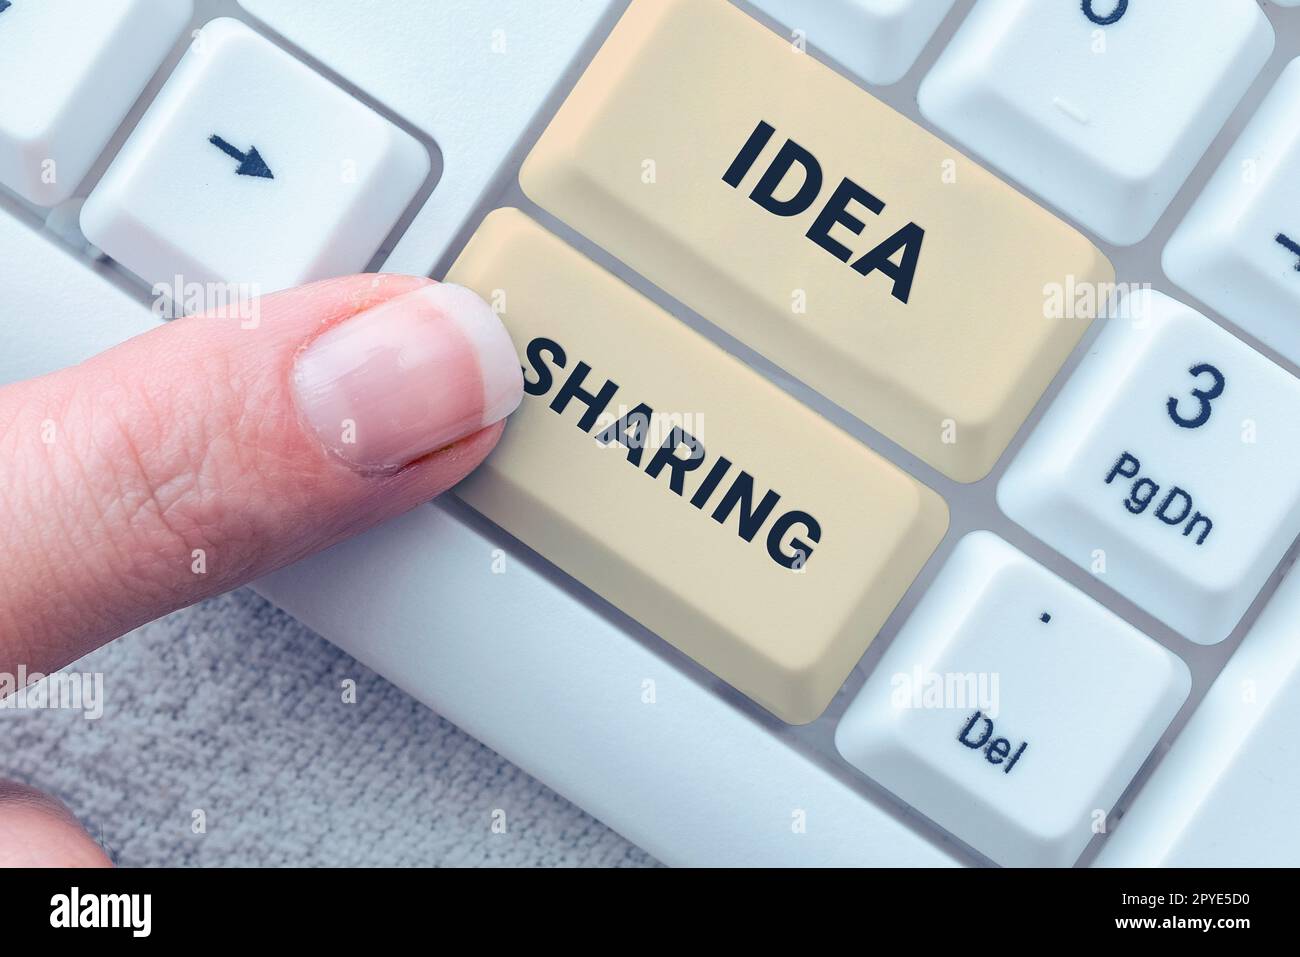 Text showing inspiration Idea Sharing. Concept meaning Startup launch innovation product, creative thinking Stock Photo